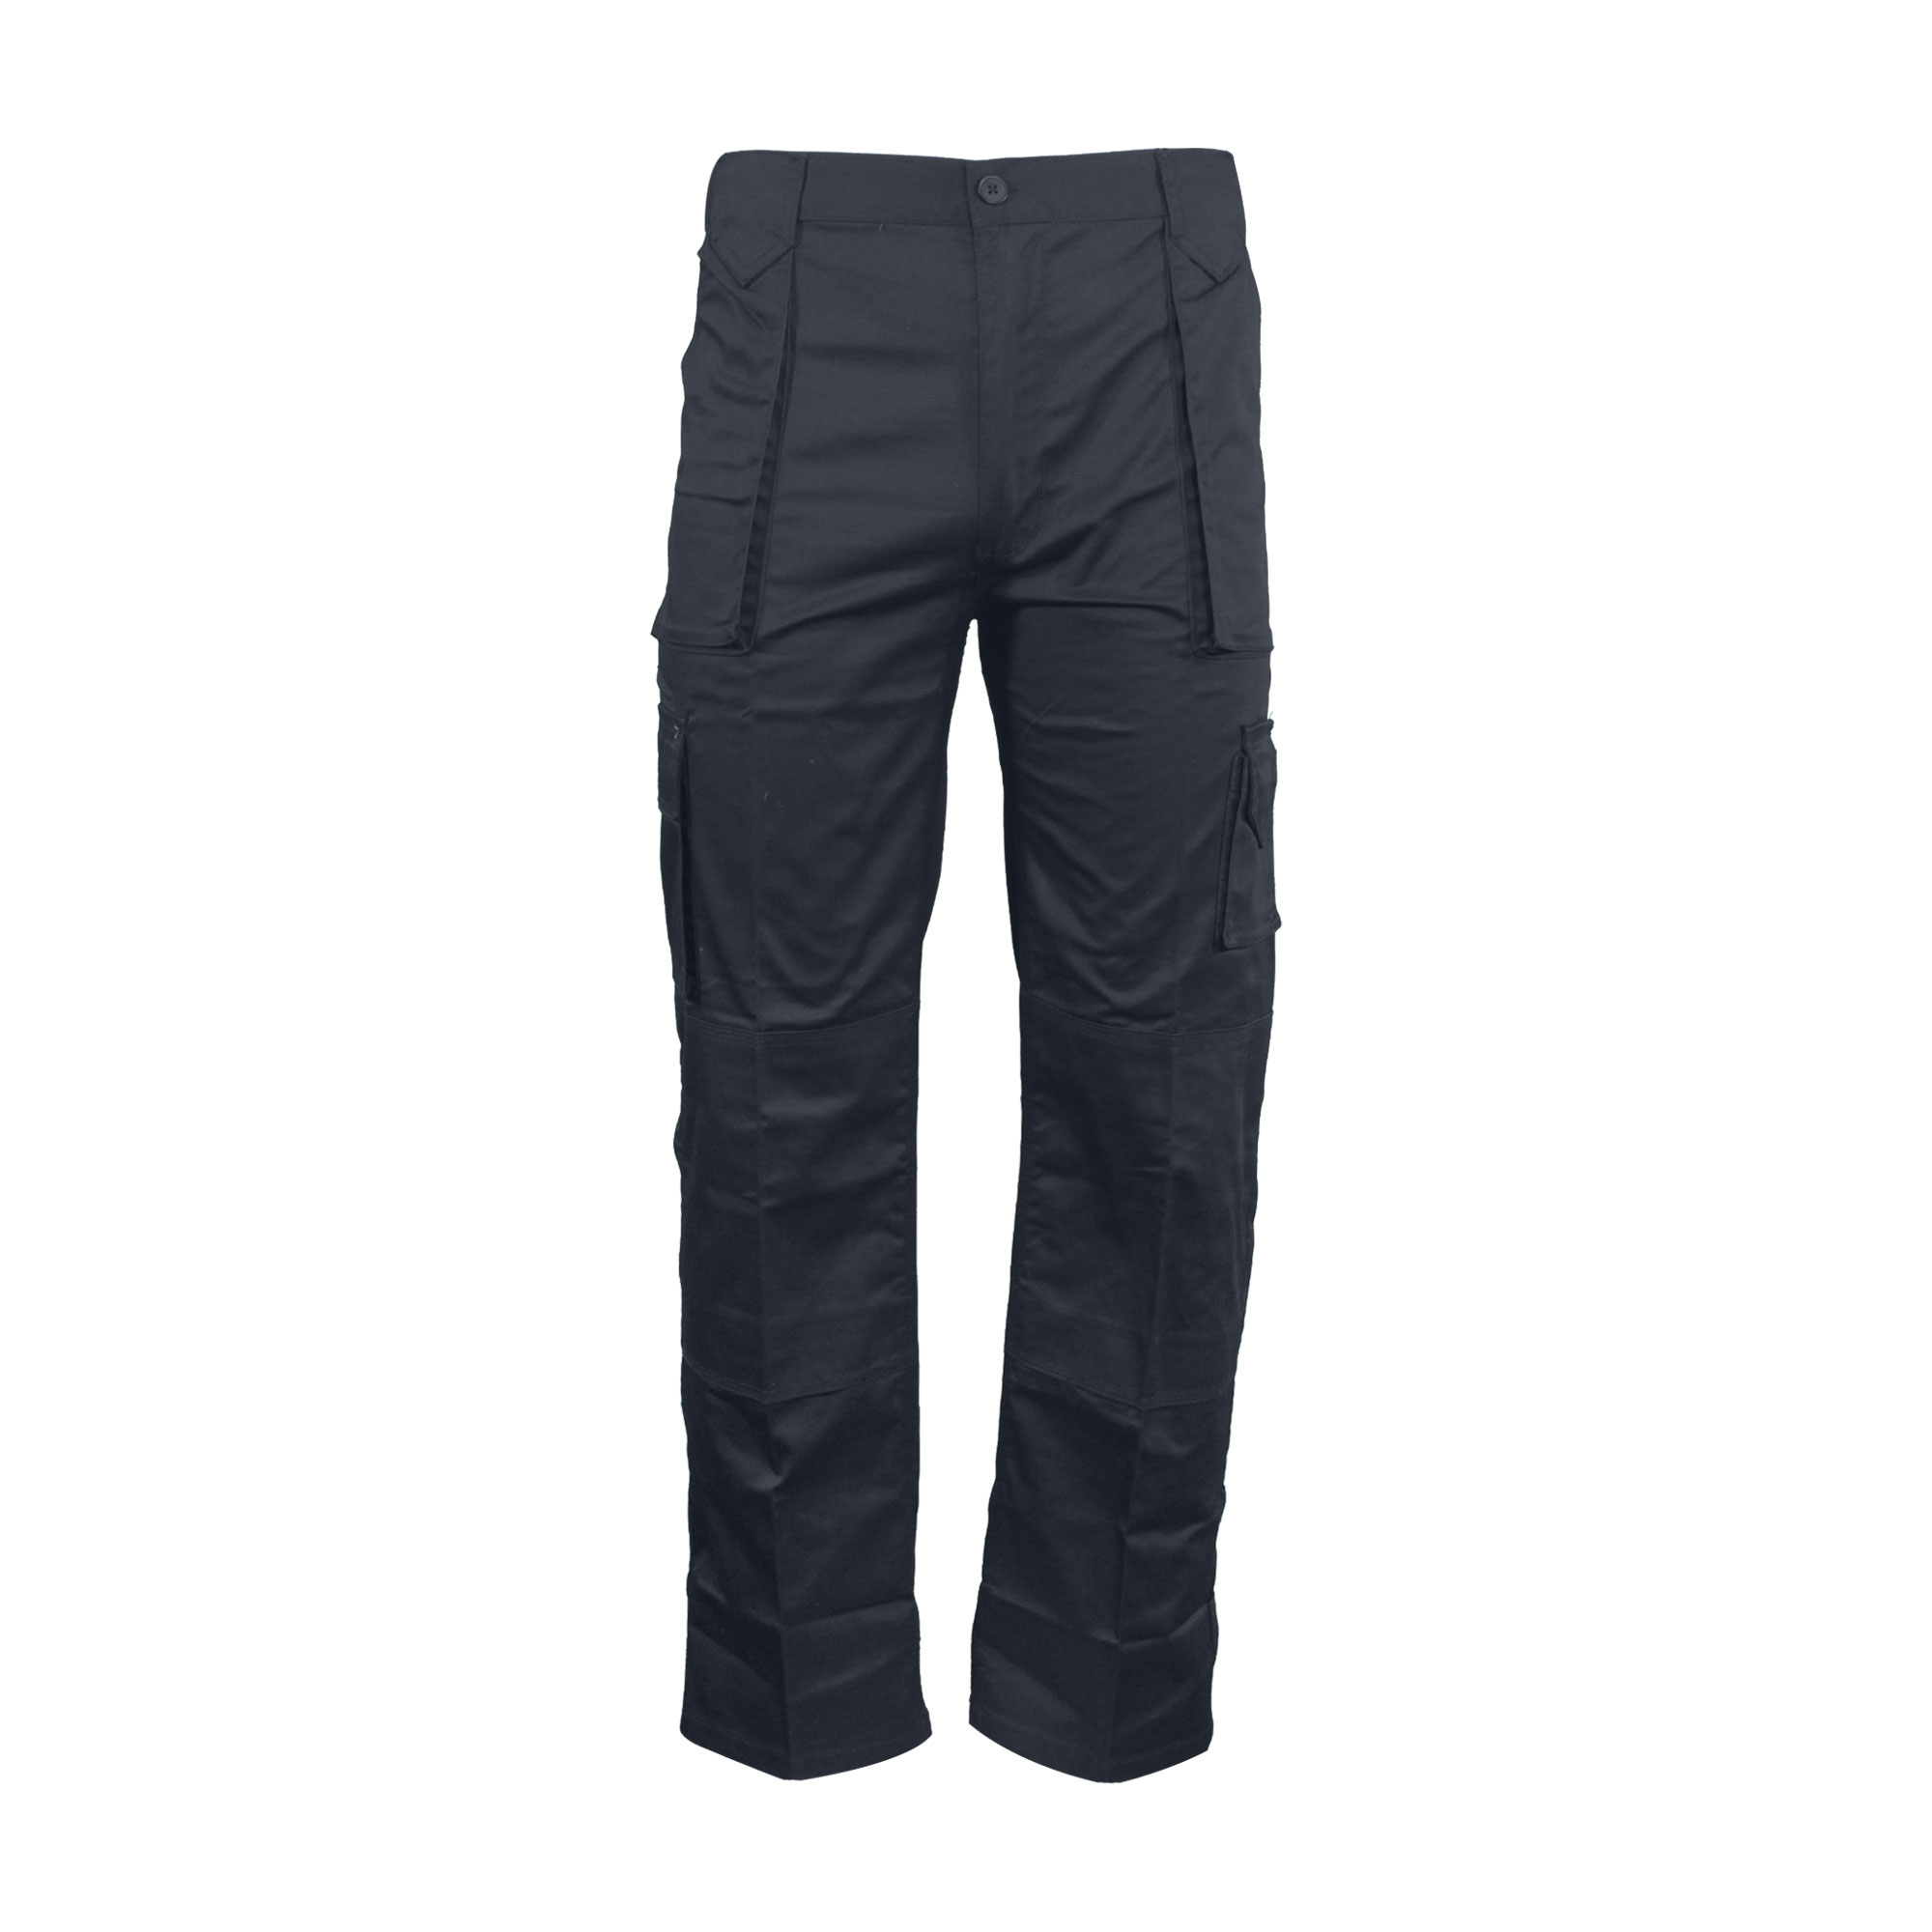 SUPER CARGO TROUSER | Warrior Protects